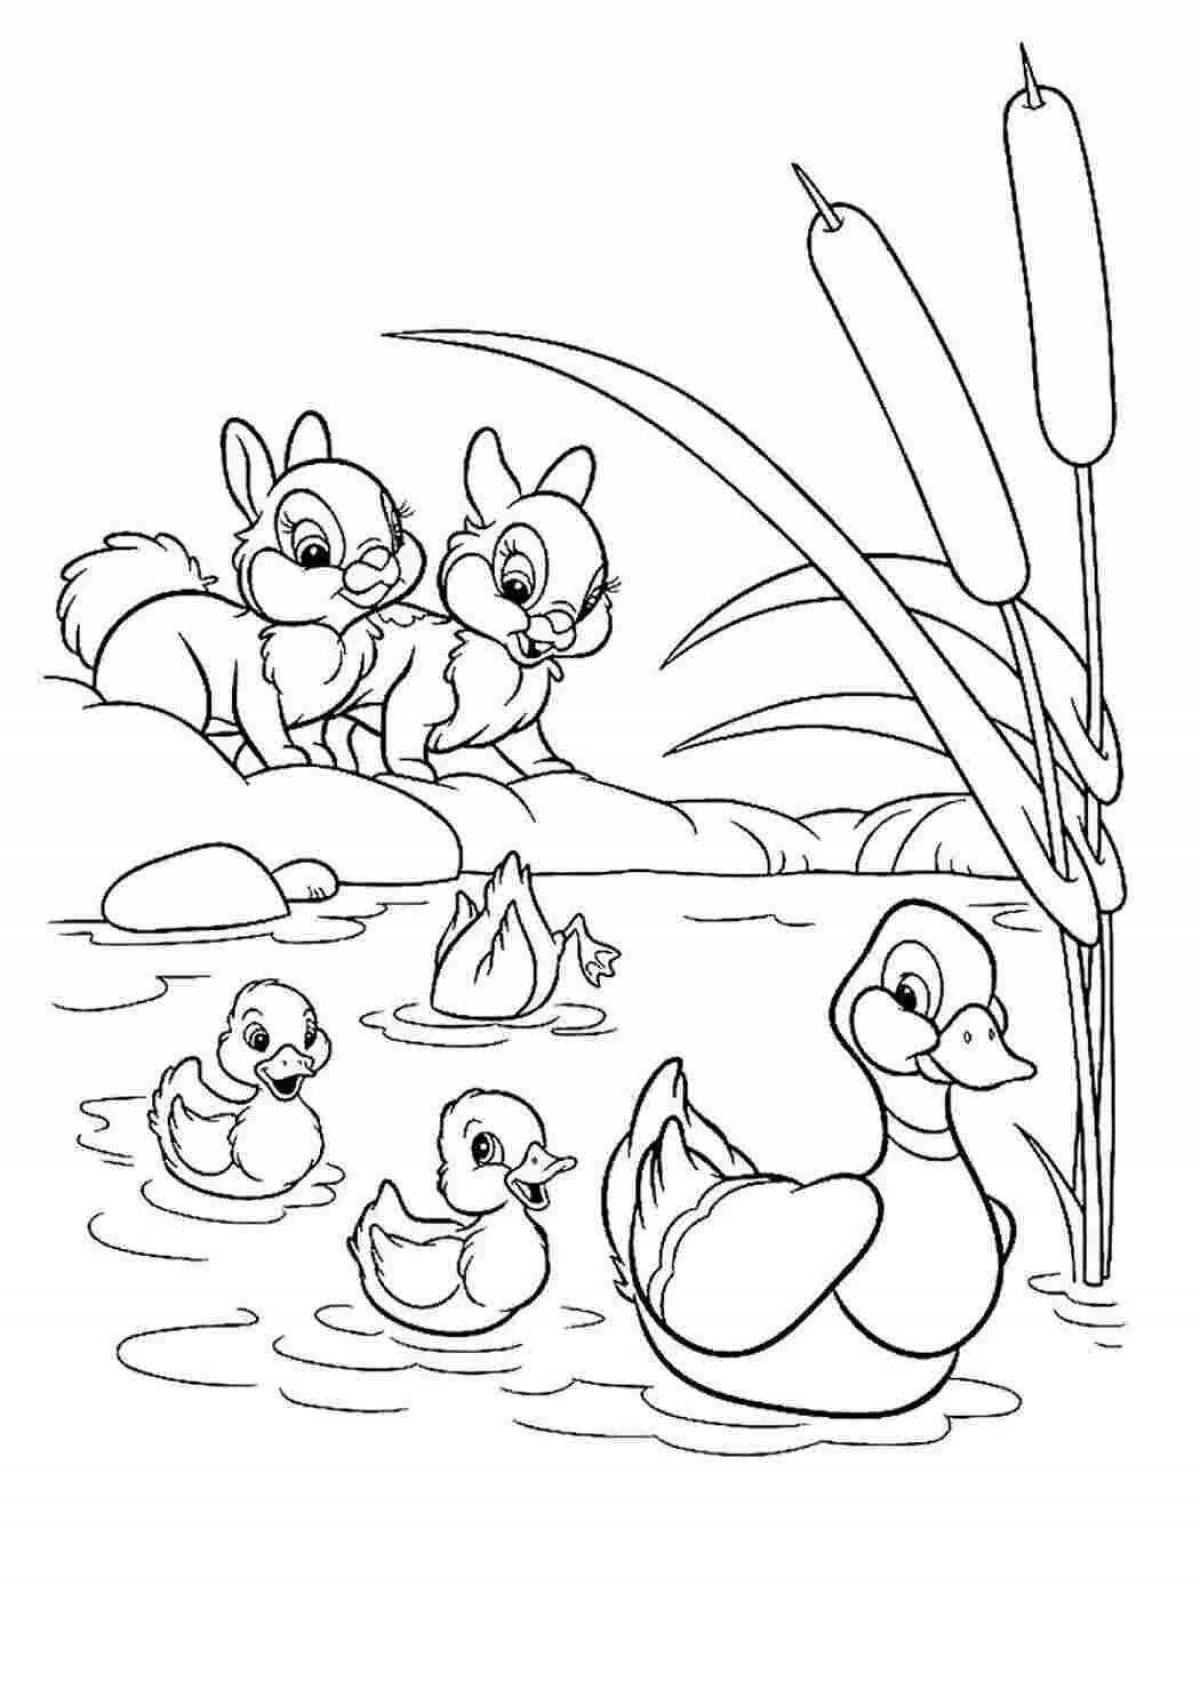 Coloring book gorgeous duck and duckling